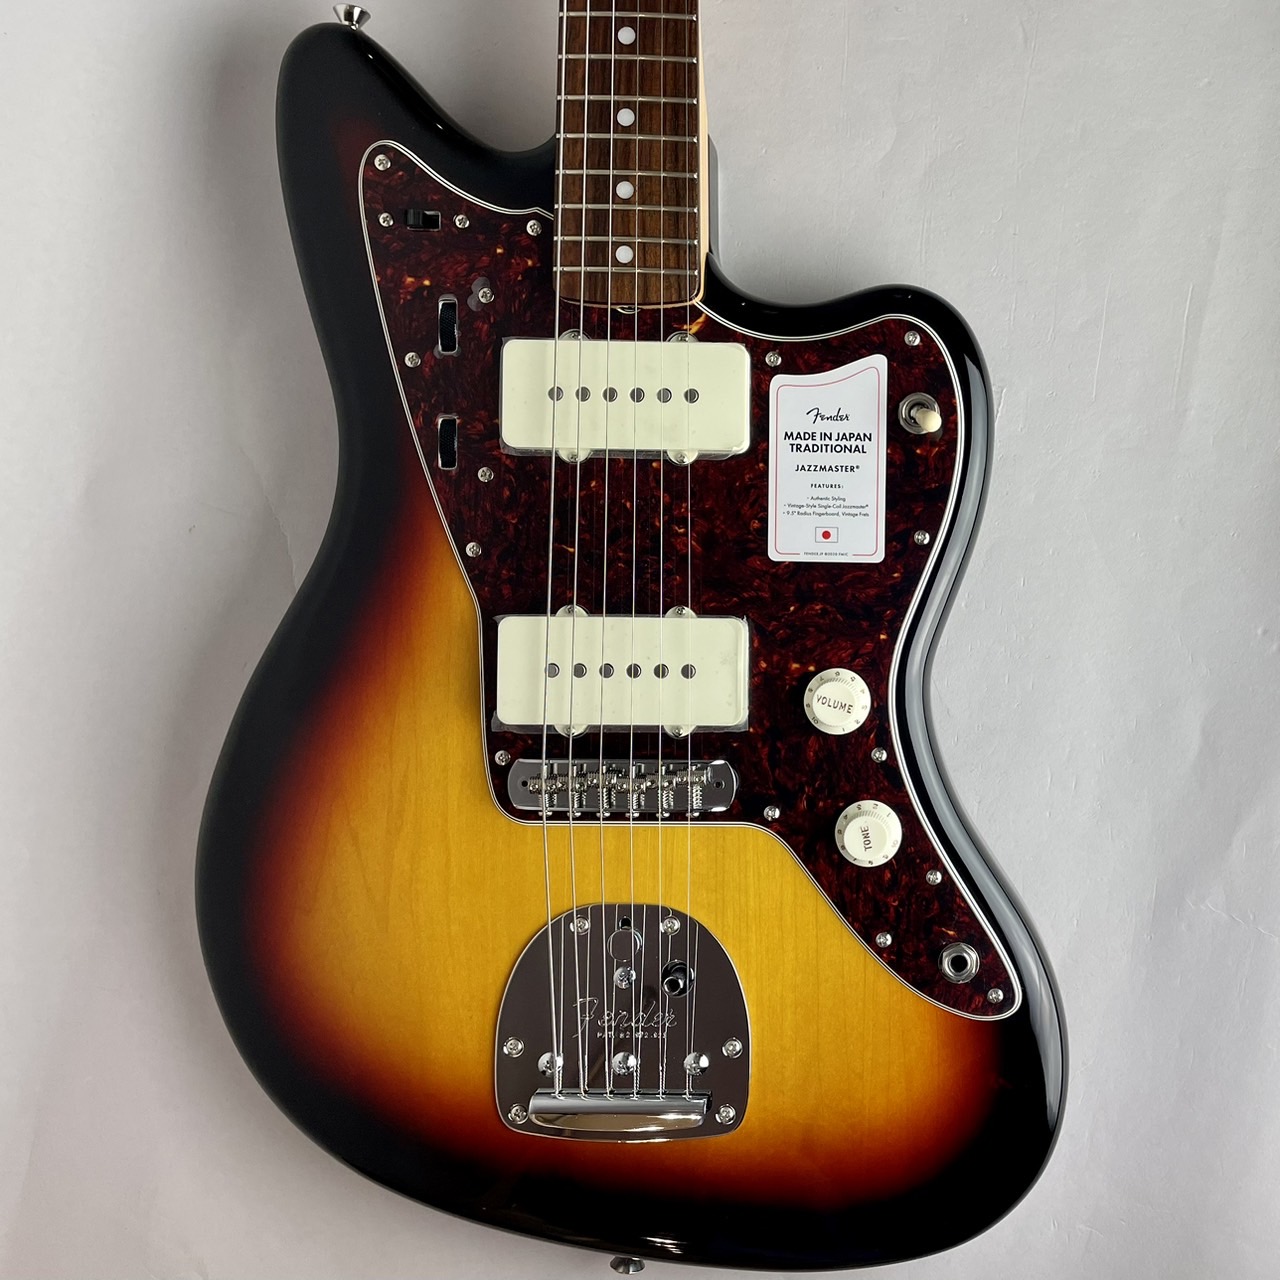 Fender Made in Japan Traditional 60s Jazzmaster【写真現物